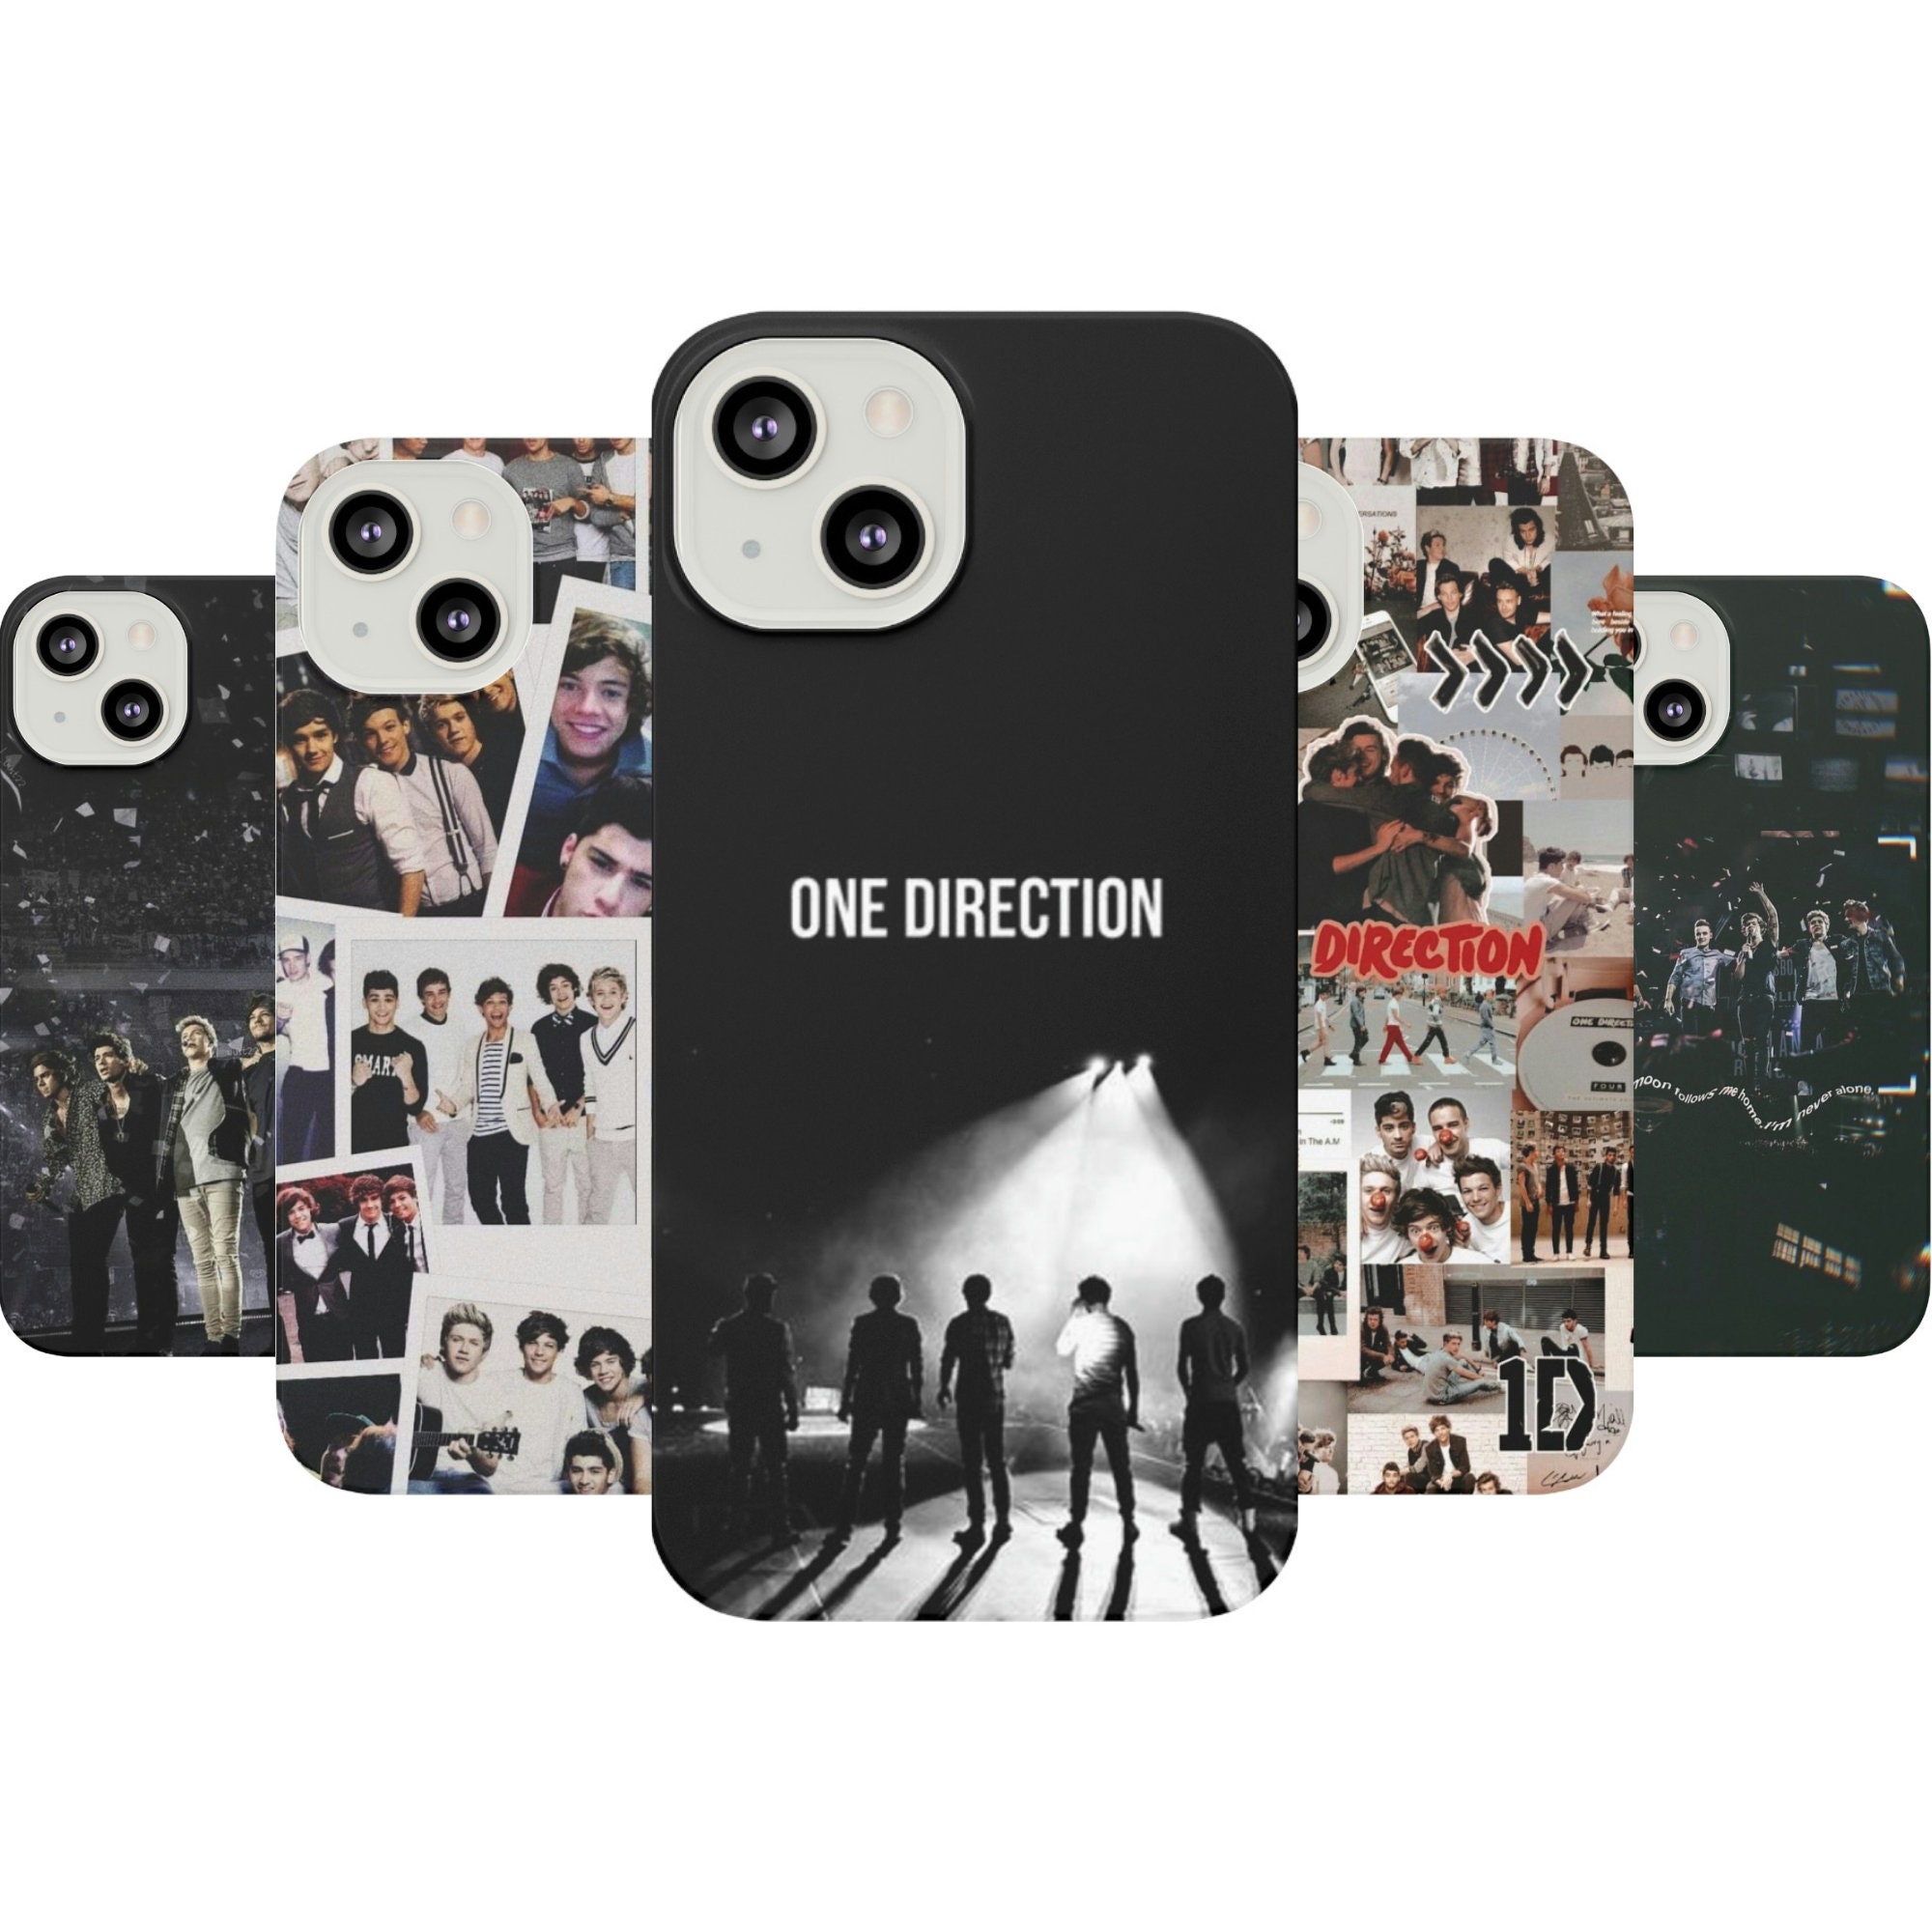 One direction case - Etsy 日本